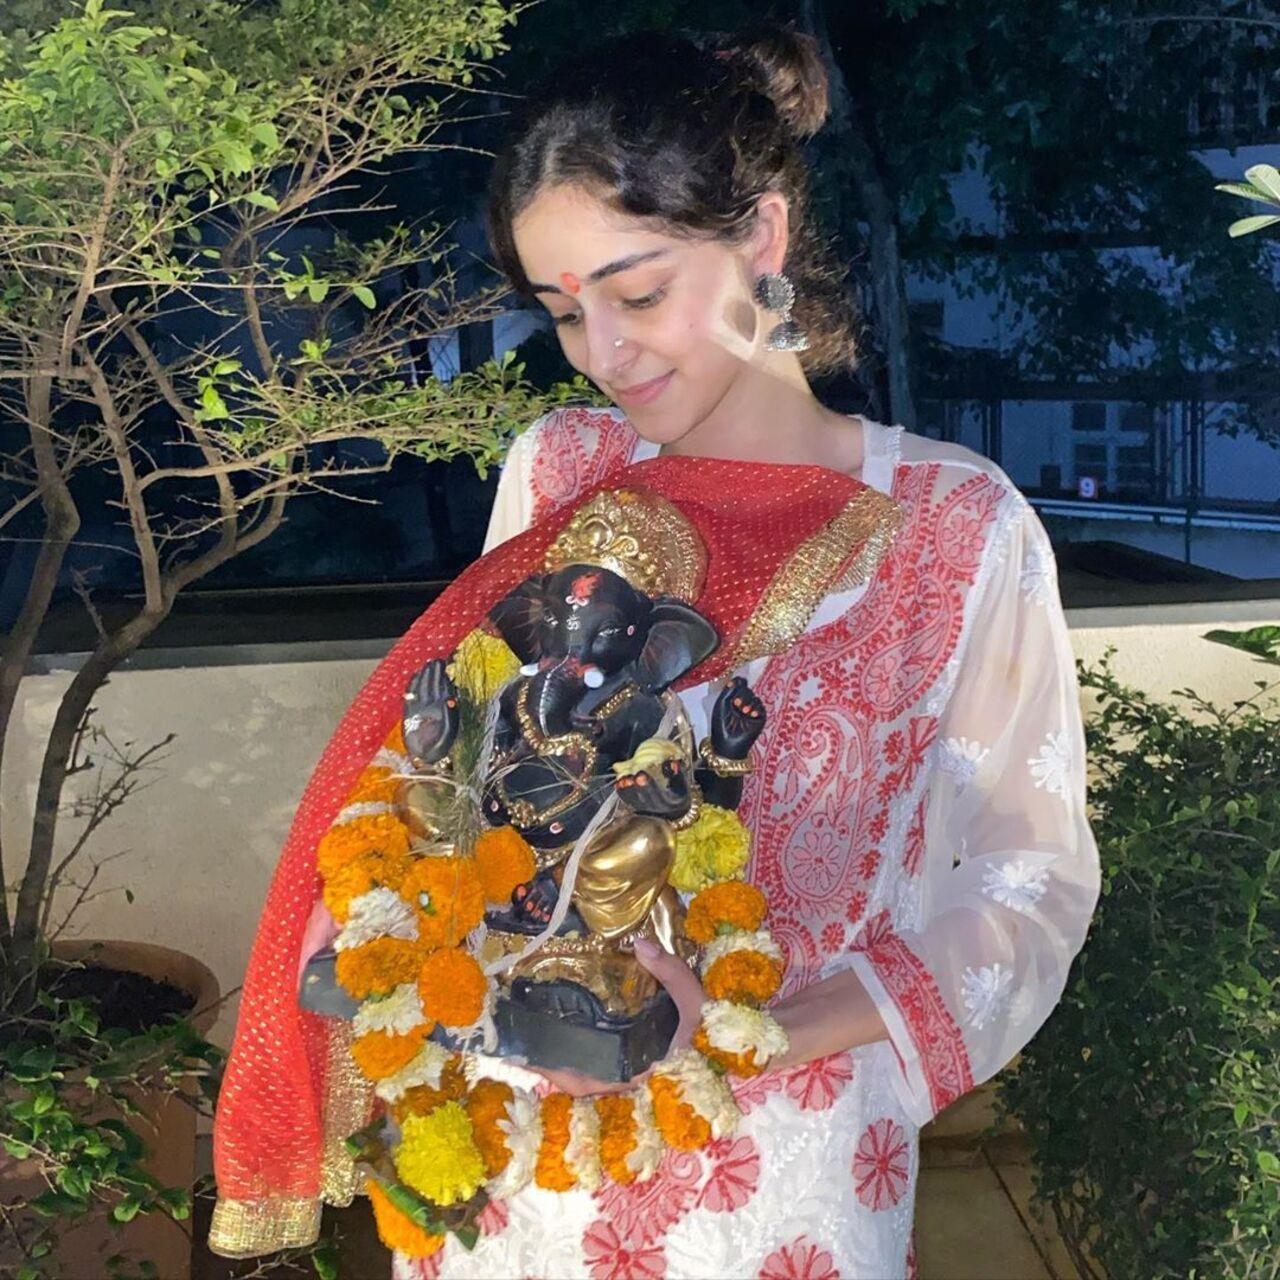 Ananya Panday and her family welcome Ganpati home every year. Their celebration is simple and often low-key